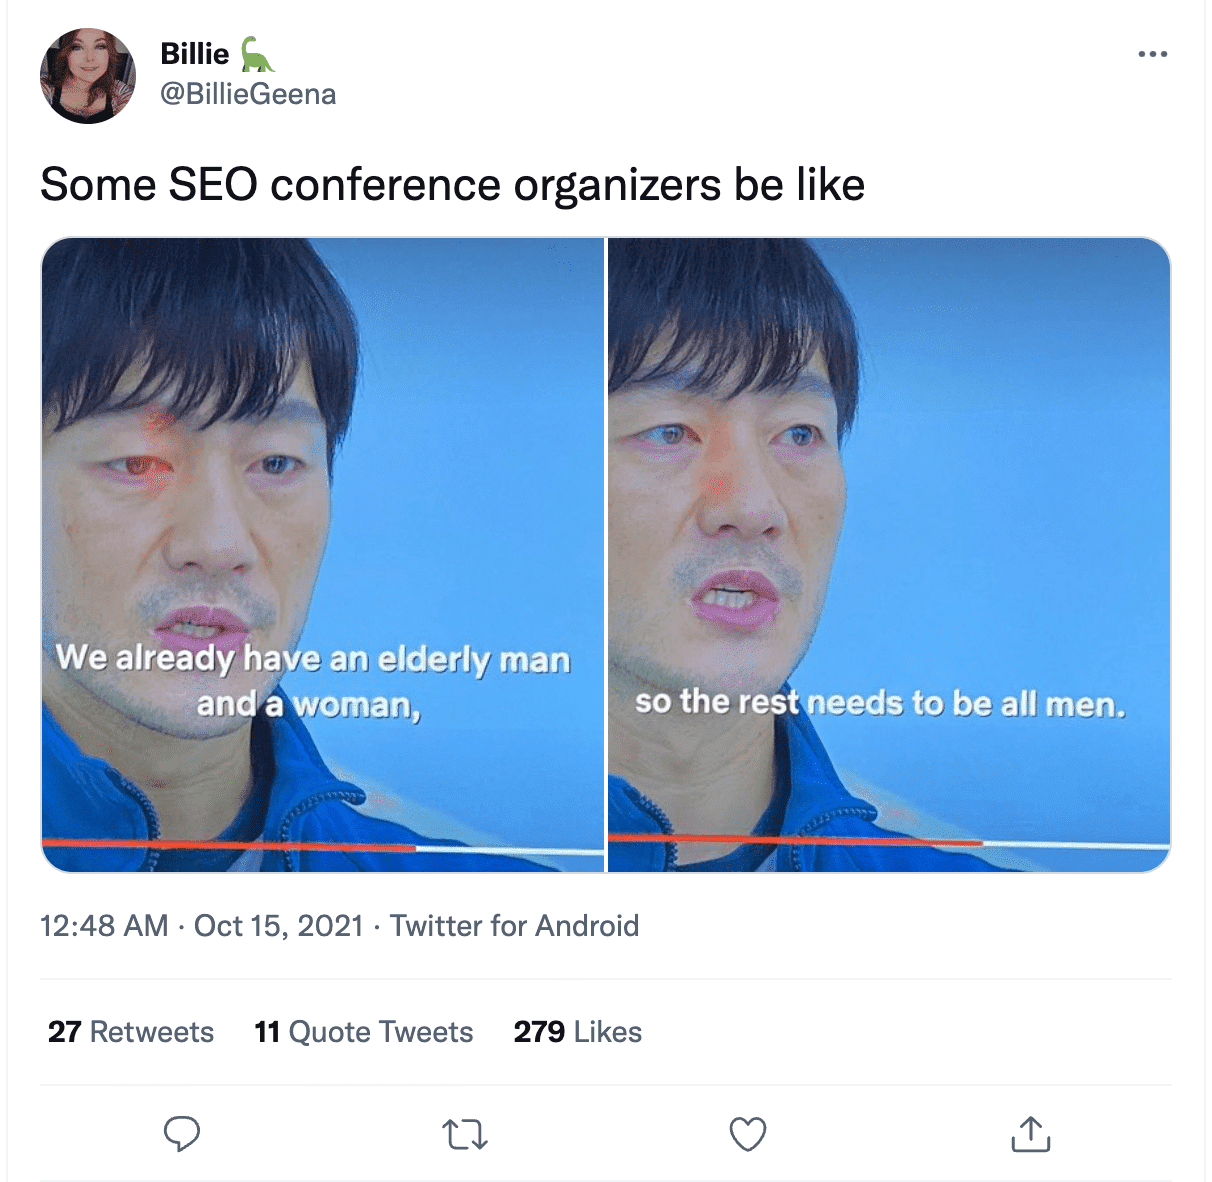 "Some SEO conference organizers be like..." meme